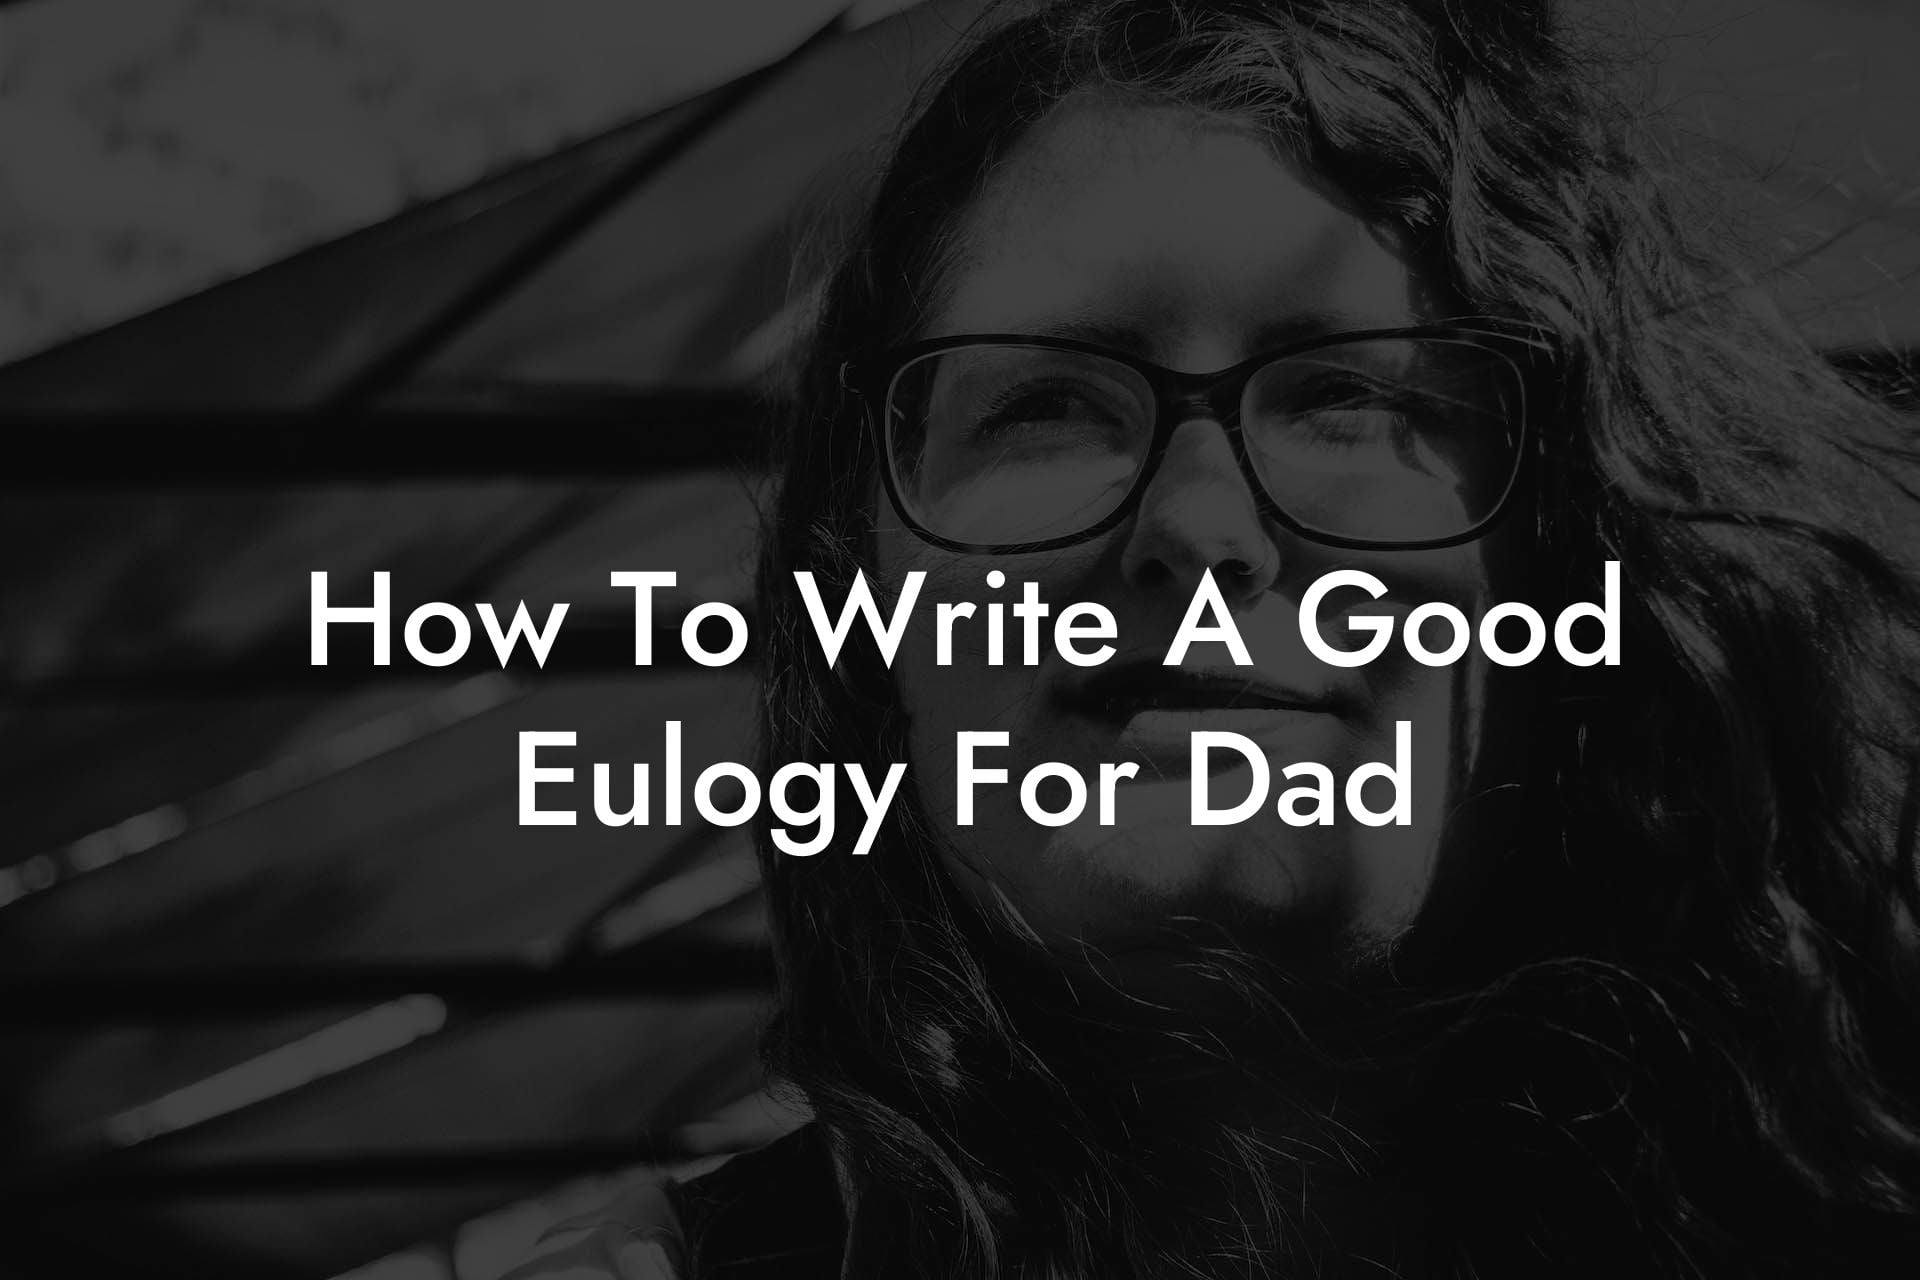 How To Write A Good Eulogy For Dad